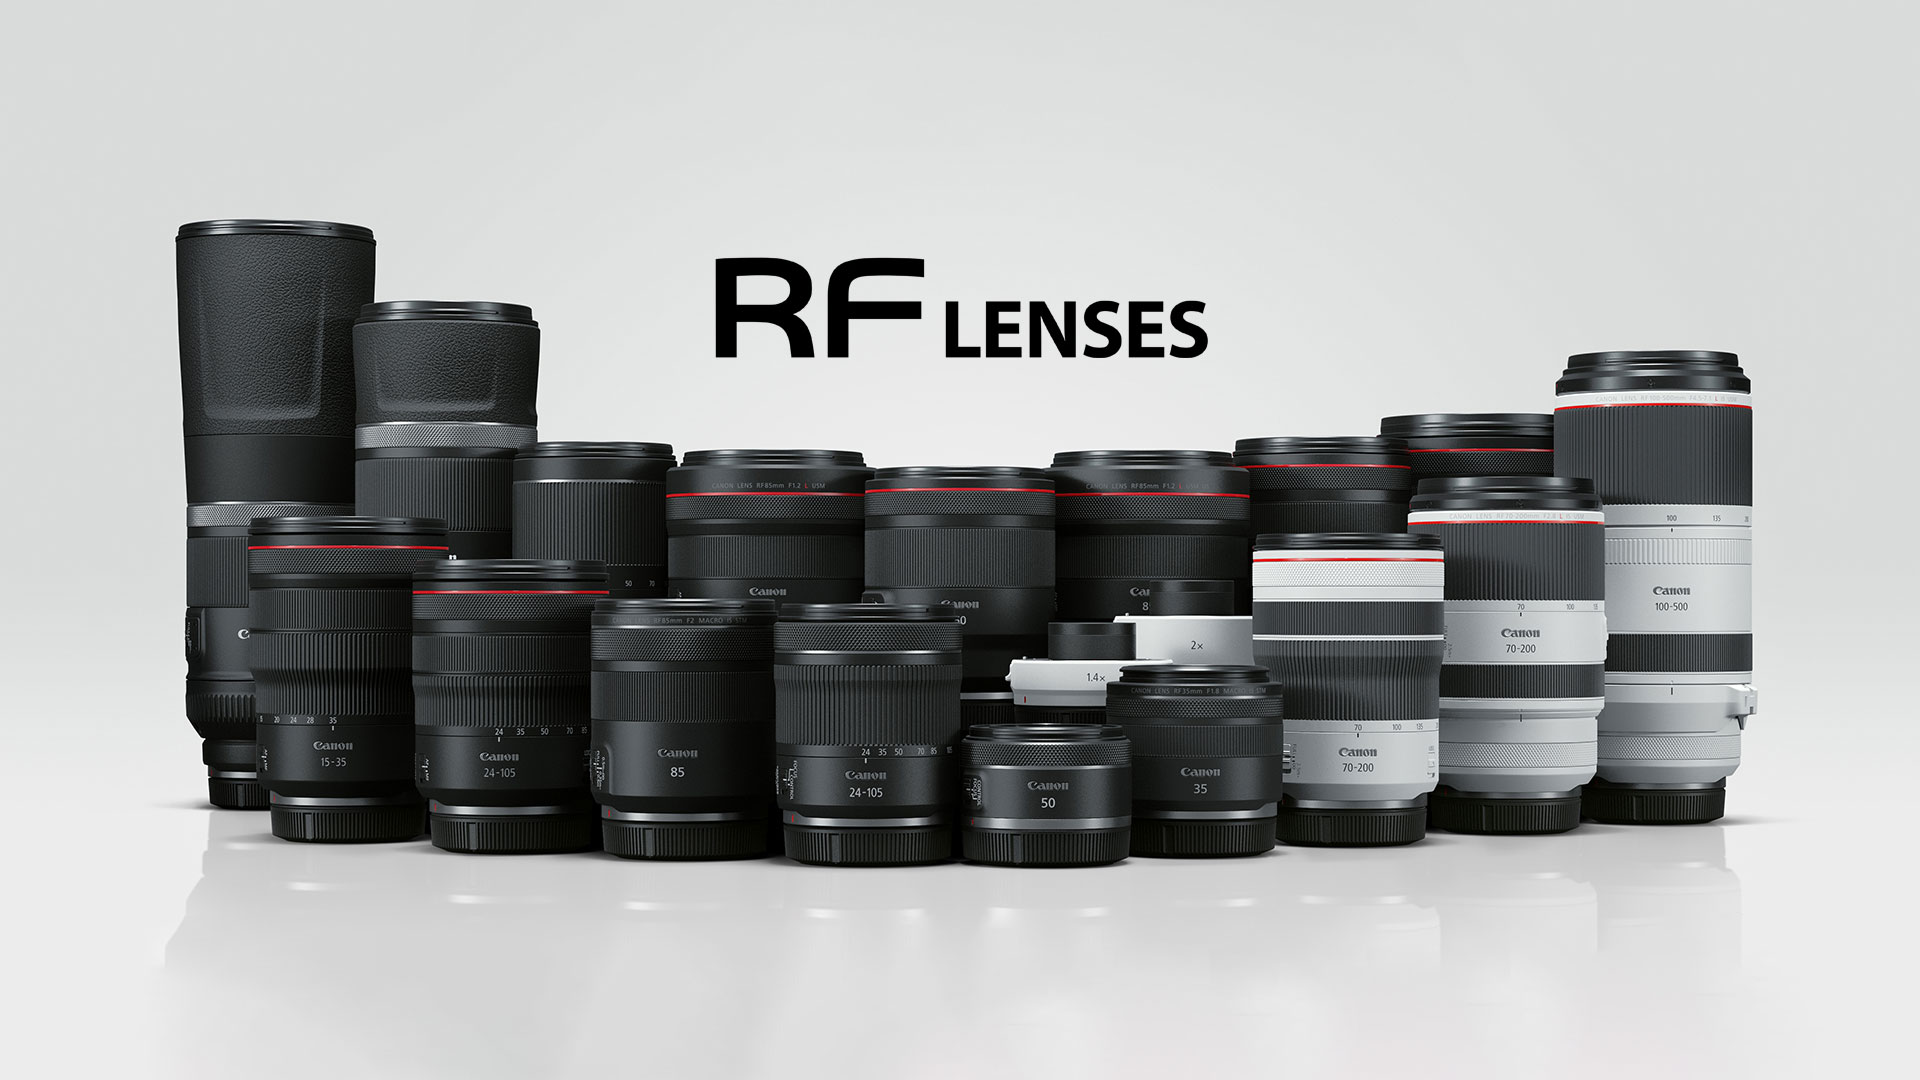 Canon EF Lenses: Up to 28% Off